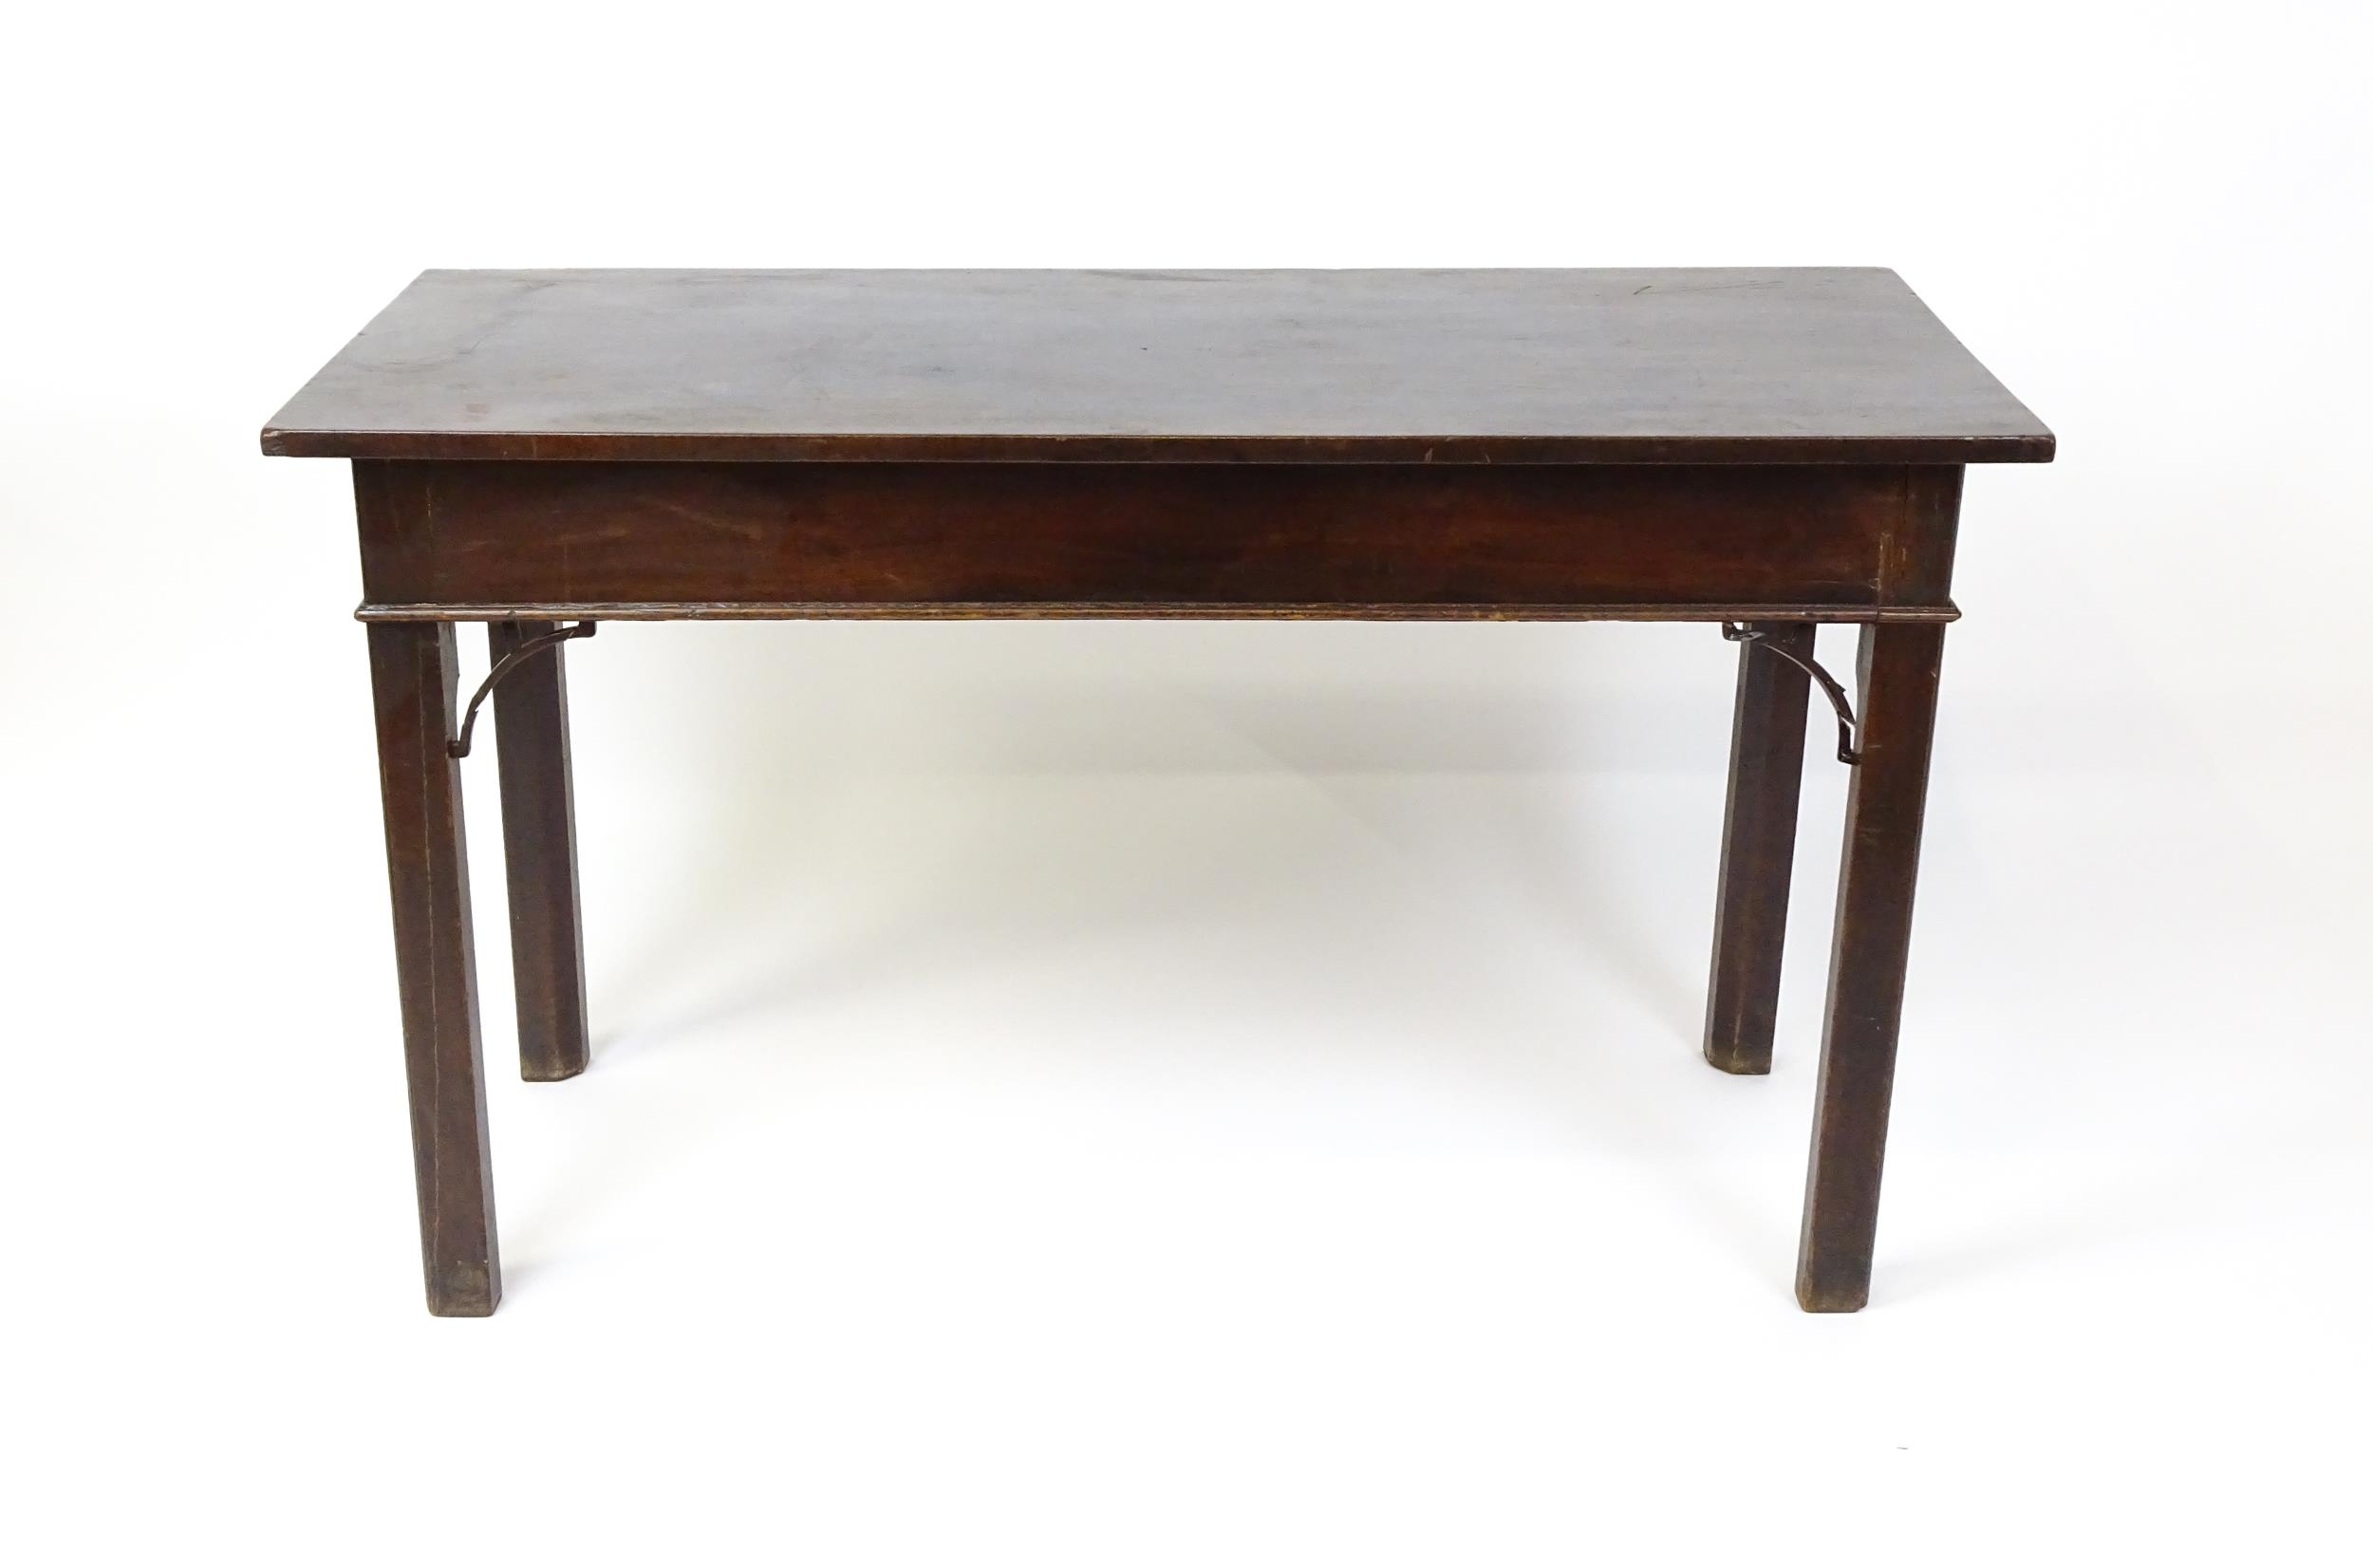 A late 18thC / early 19thC mahogany Chippendale style side table with brackets to the apron and - Image 7 of 9